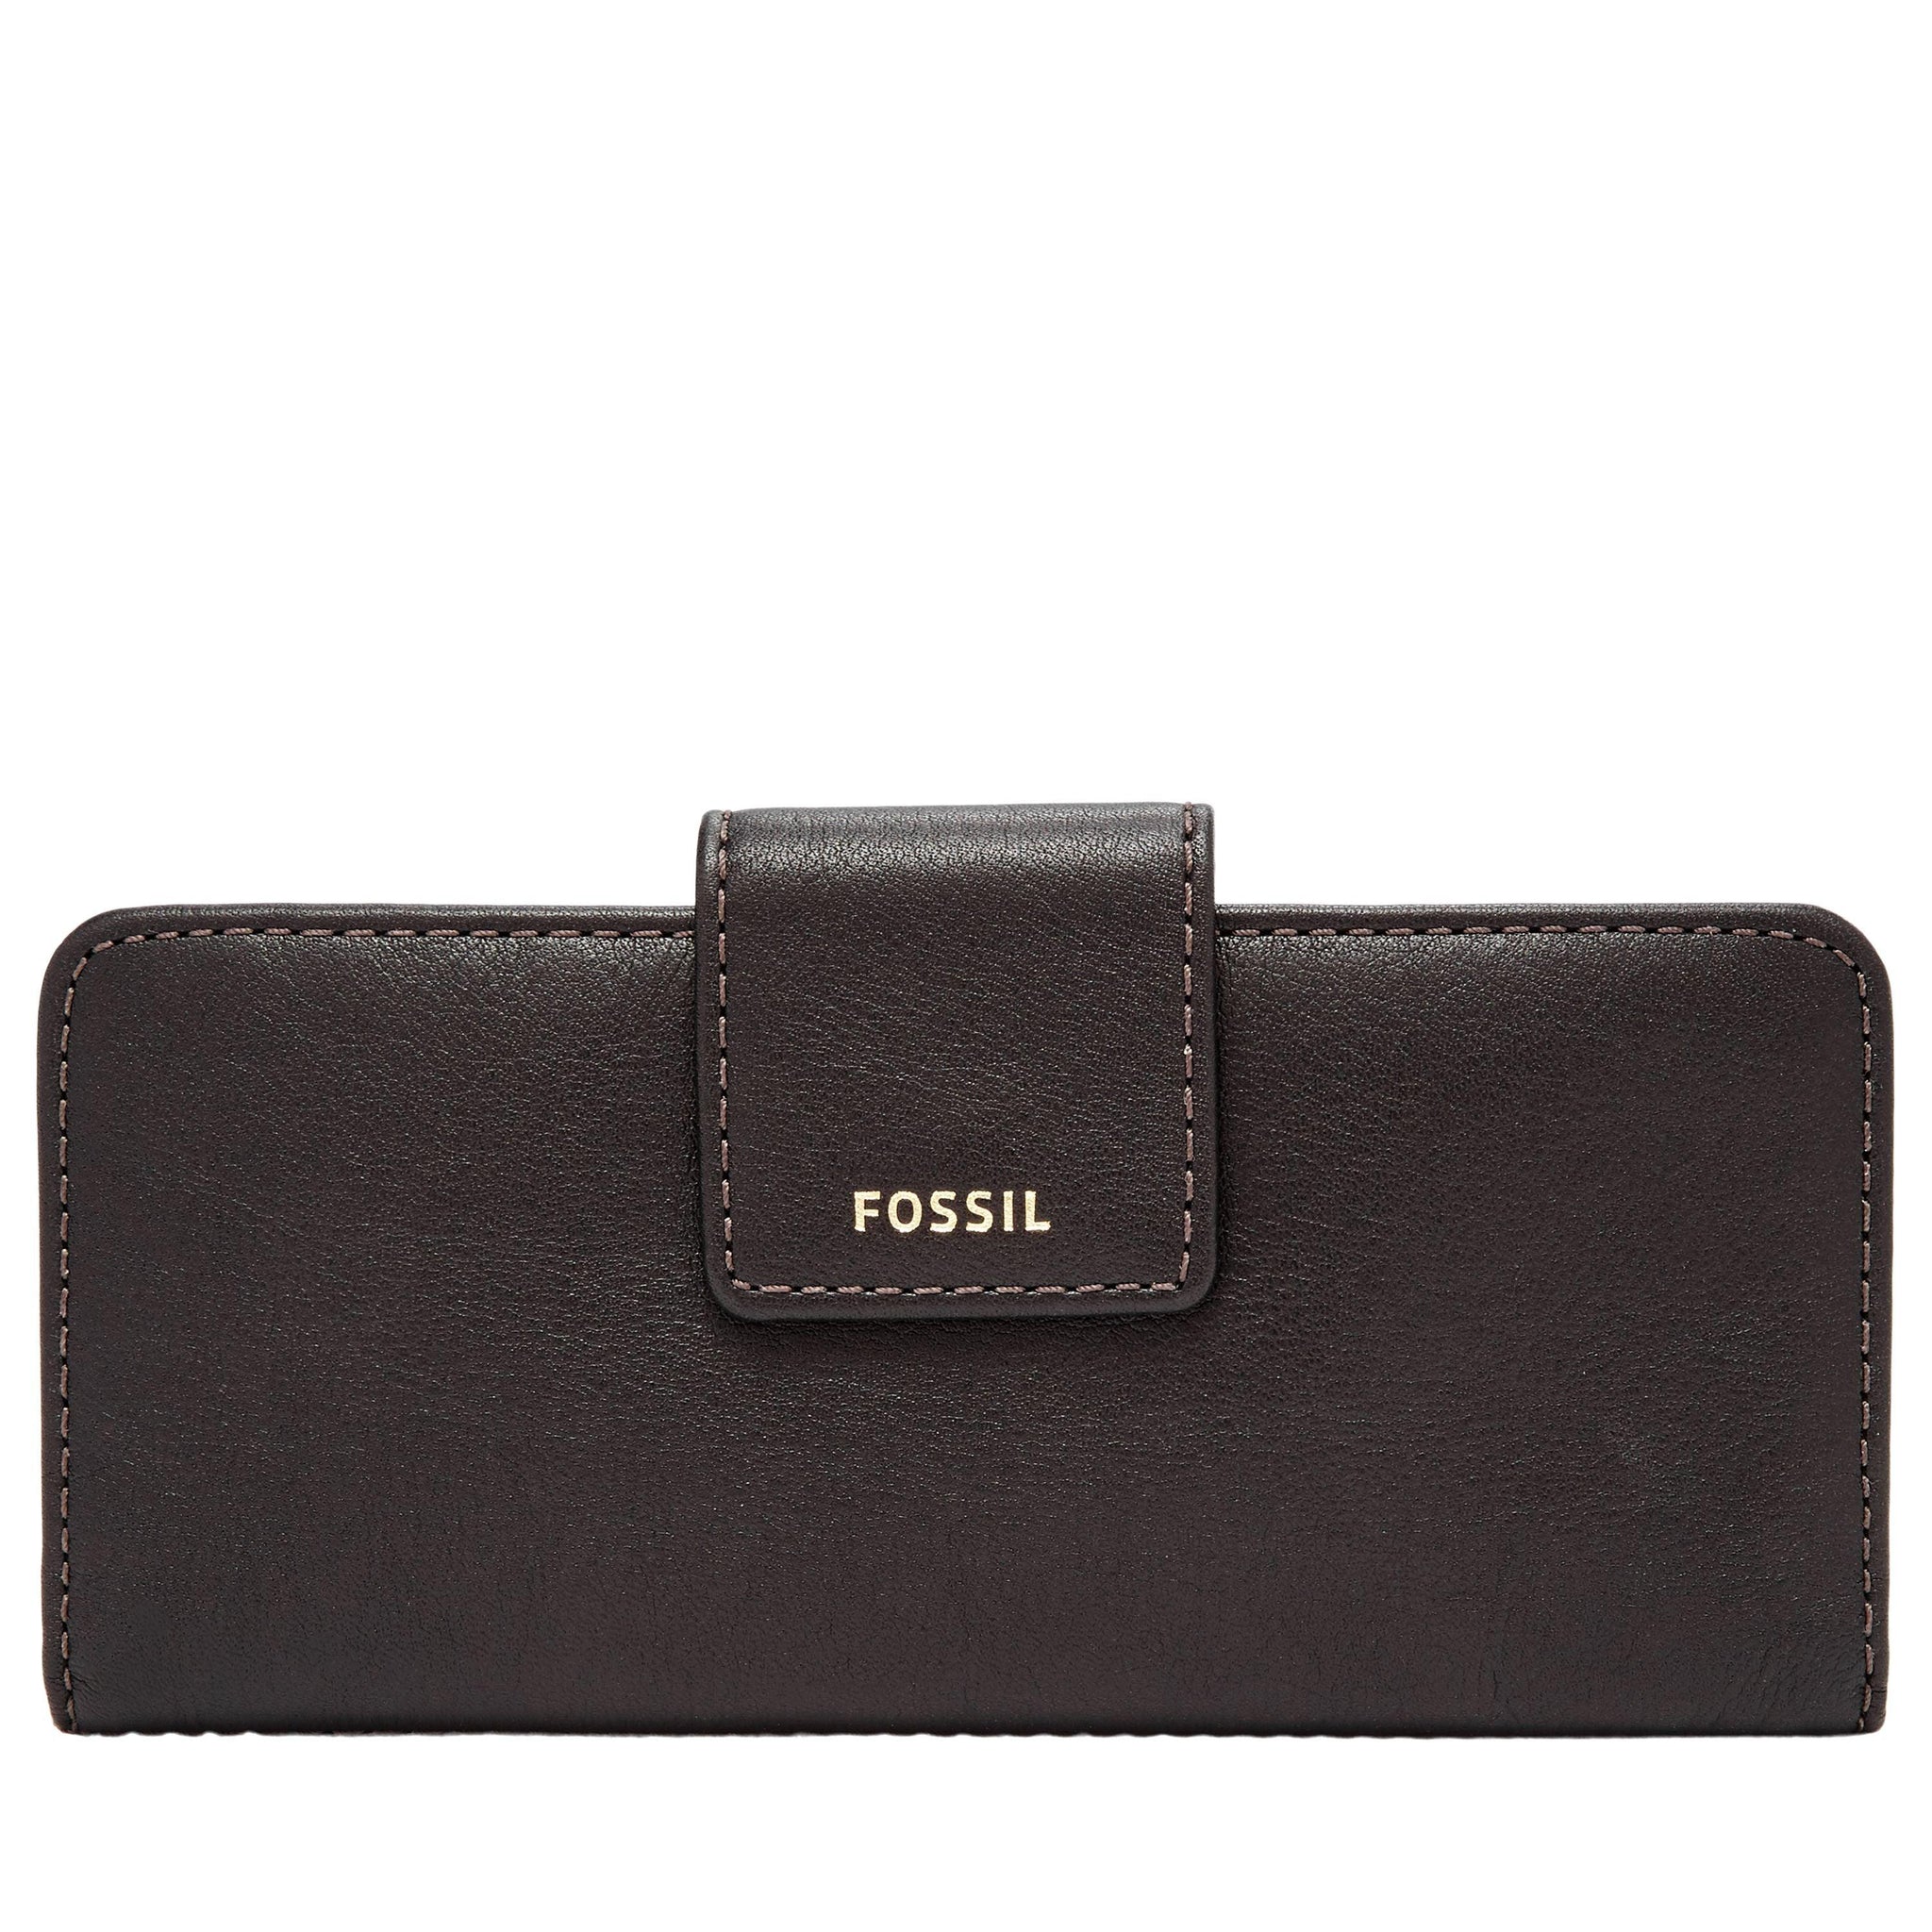 Fossil Women's Madison Leather Clutch - CADEAUME